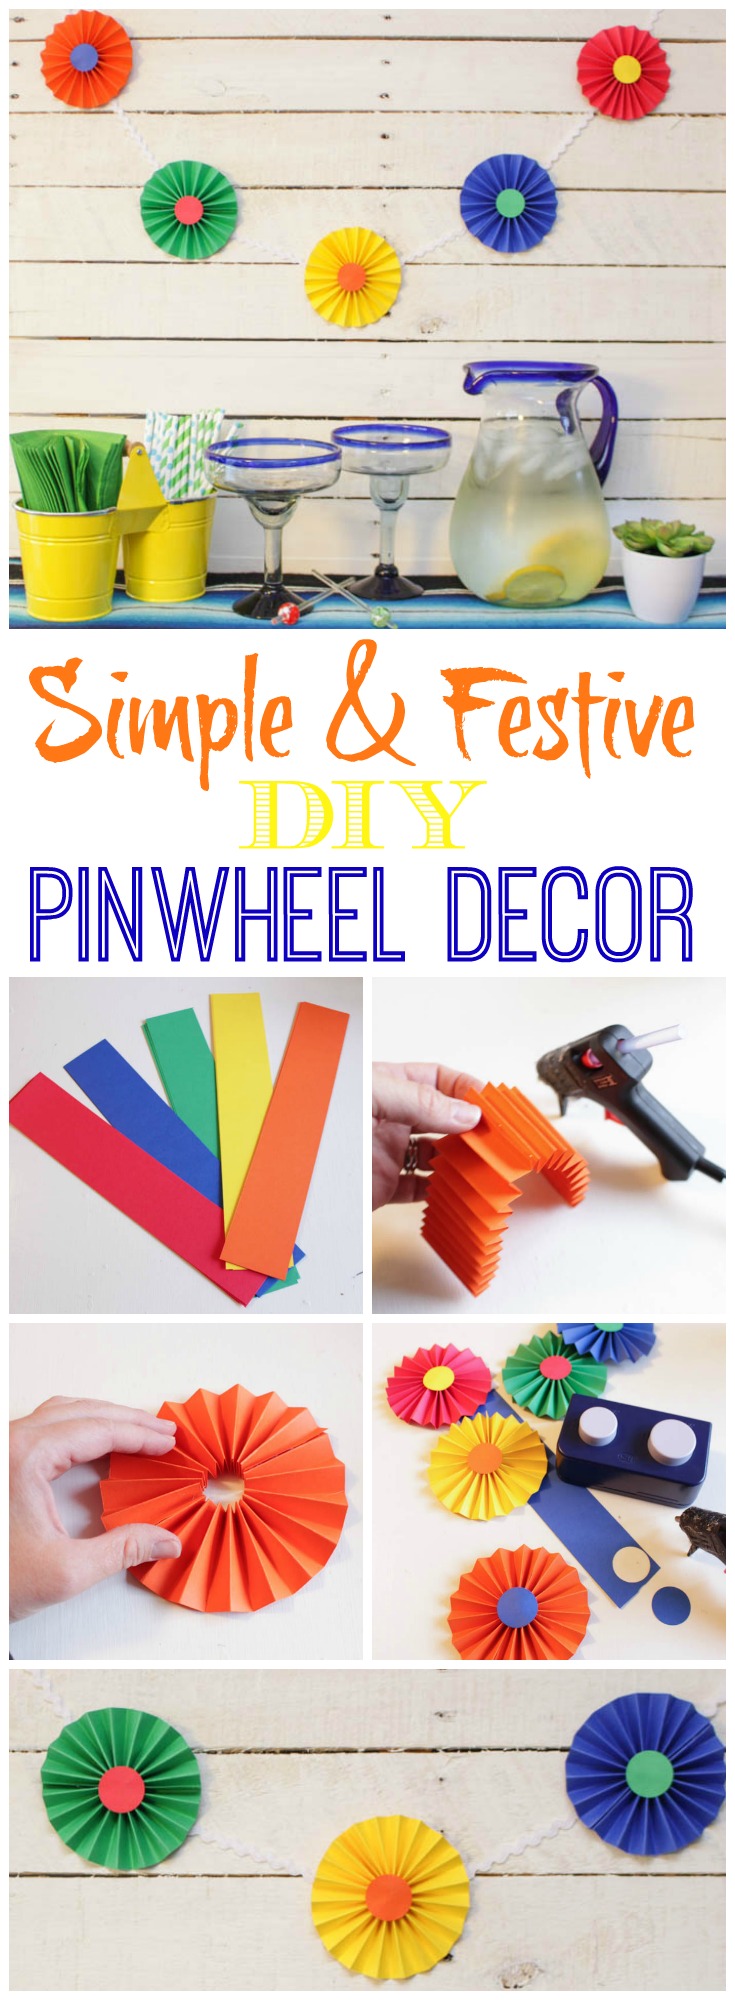 Great tutorial for these easy DIY pinwheels - they are so cute and festive and perfect for any party decor